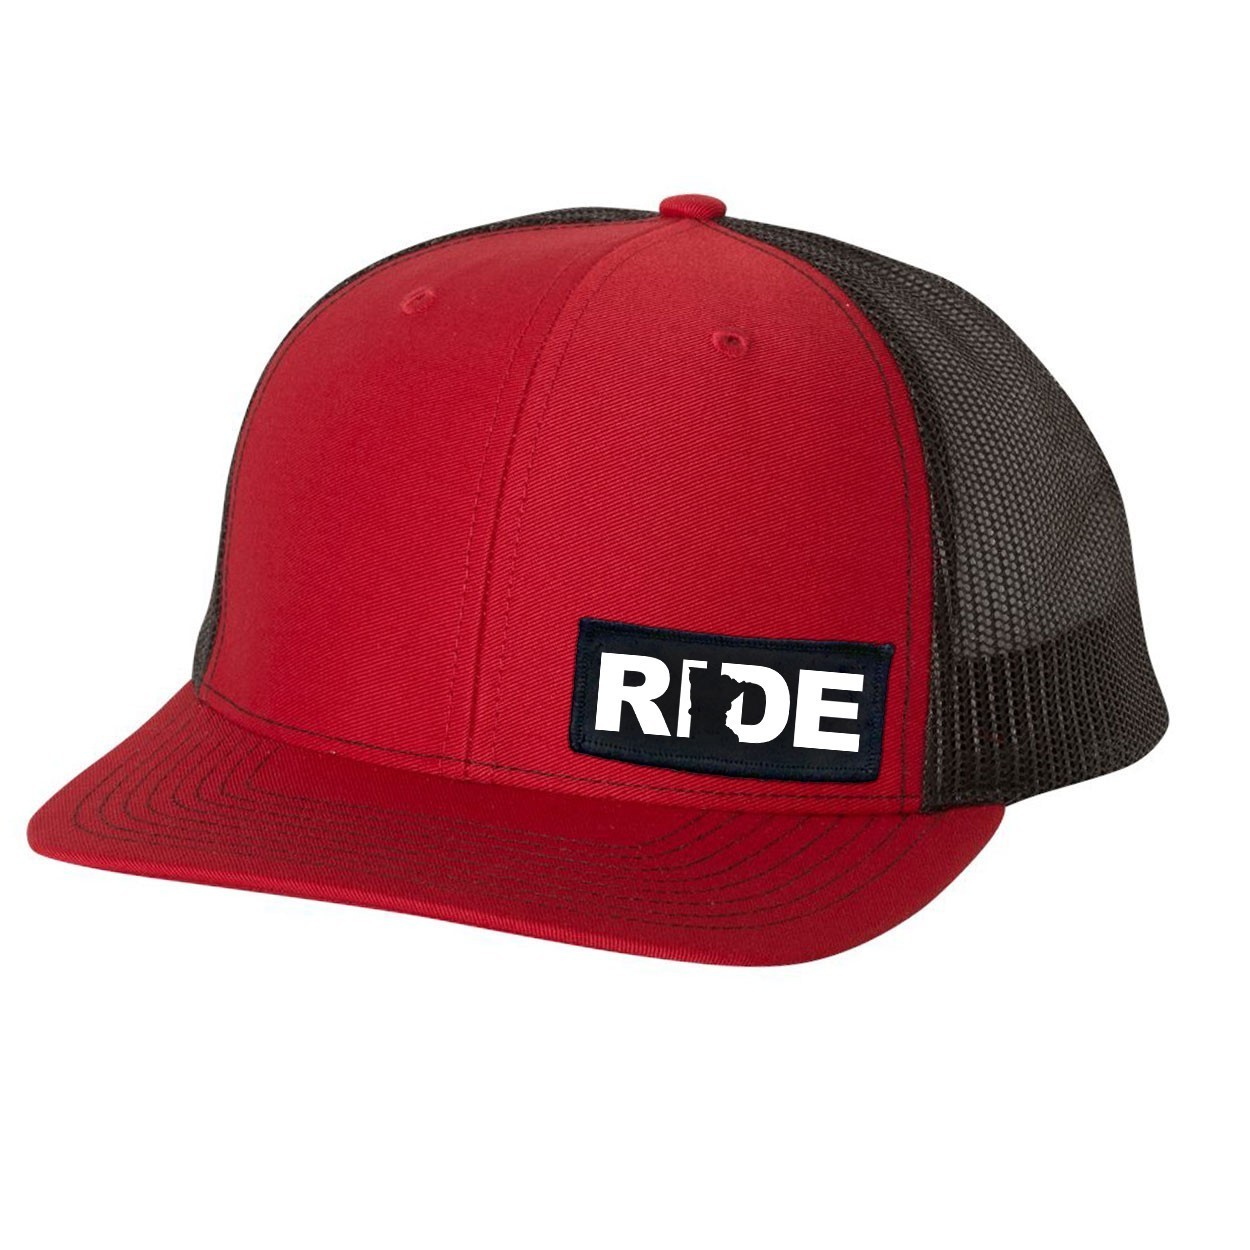 Ride Minnesota Night Out Woven Patch Snapback Trucker Hat Red/Black (White Logo)